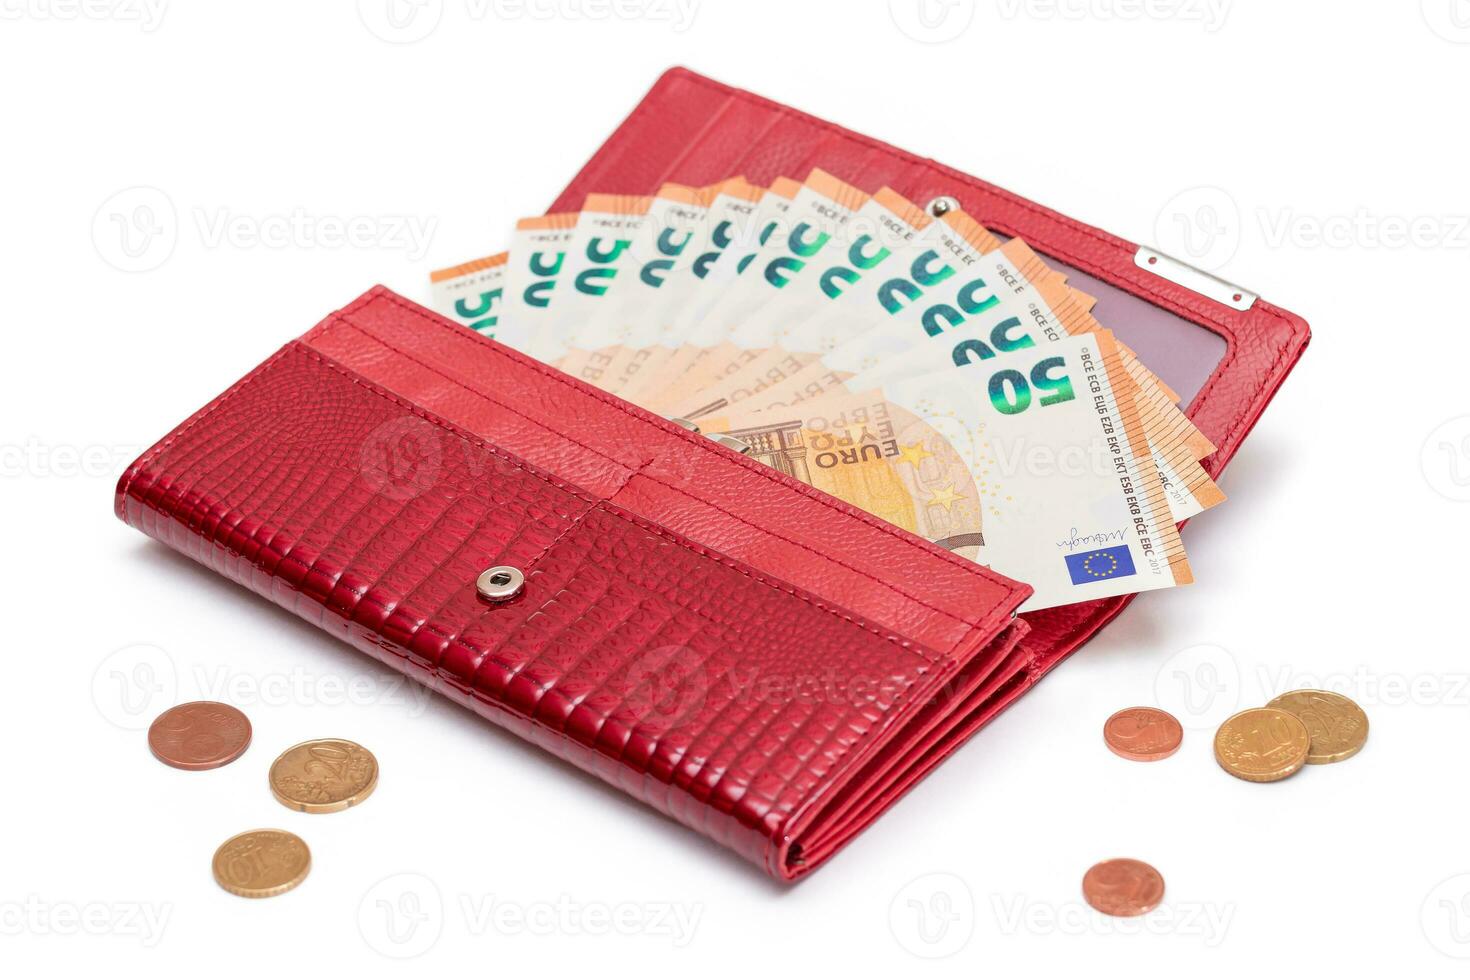 Opened Red Women Purse with 50 Euro Banknotes Inside and Scattered Euro Cent Coins - Isolated on White Background. A Wallet Full of Money Symbolizing Wealth, Success, Shopping and Social Status - Isolation photo